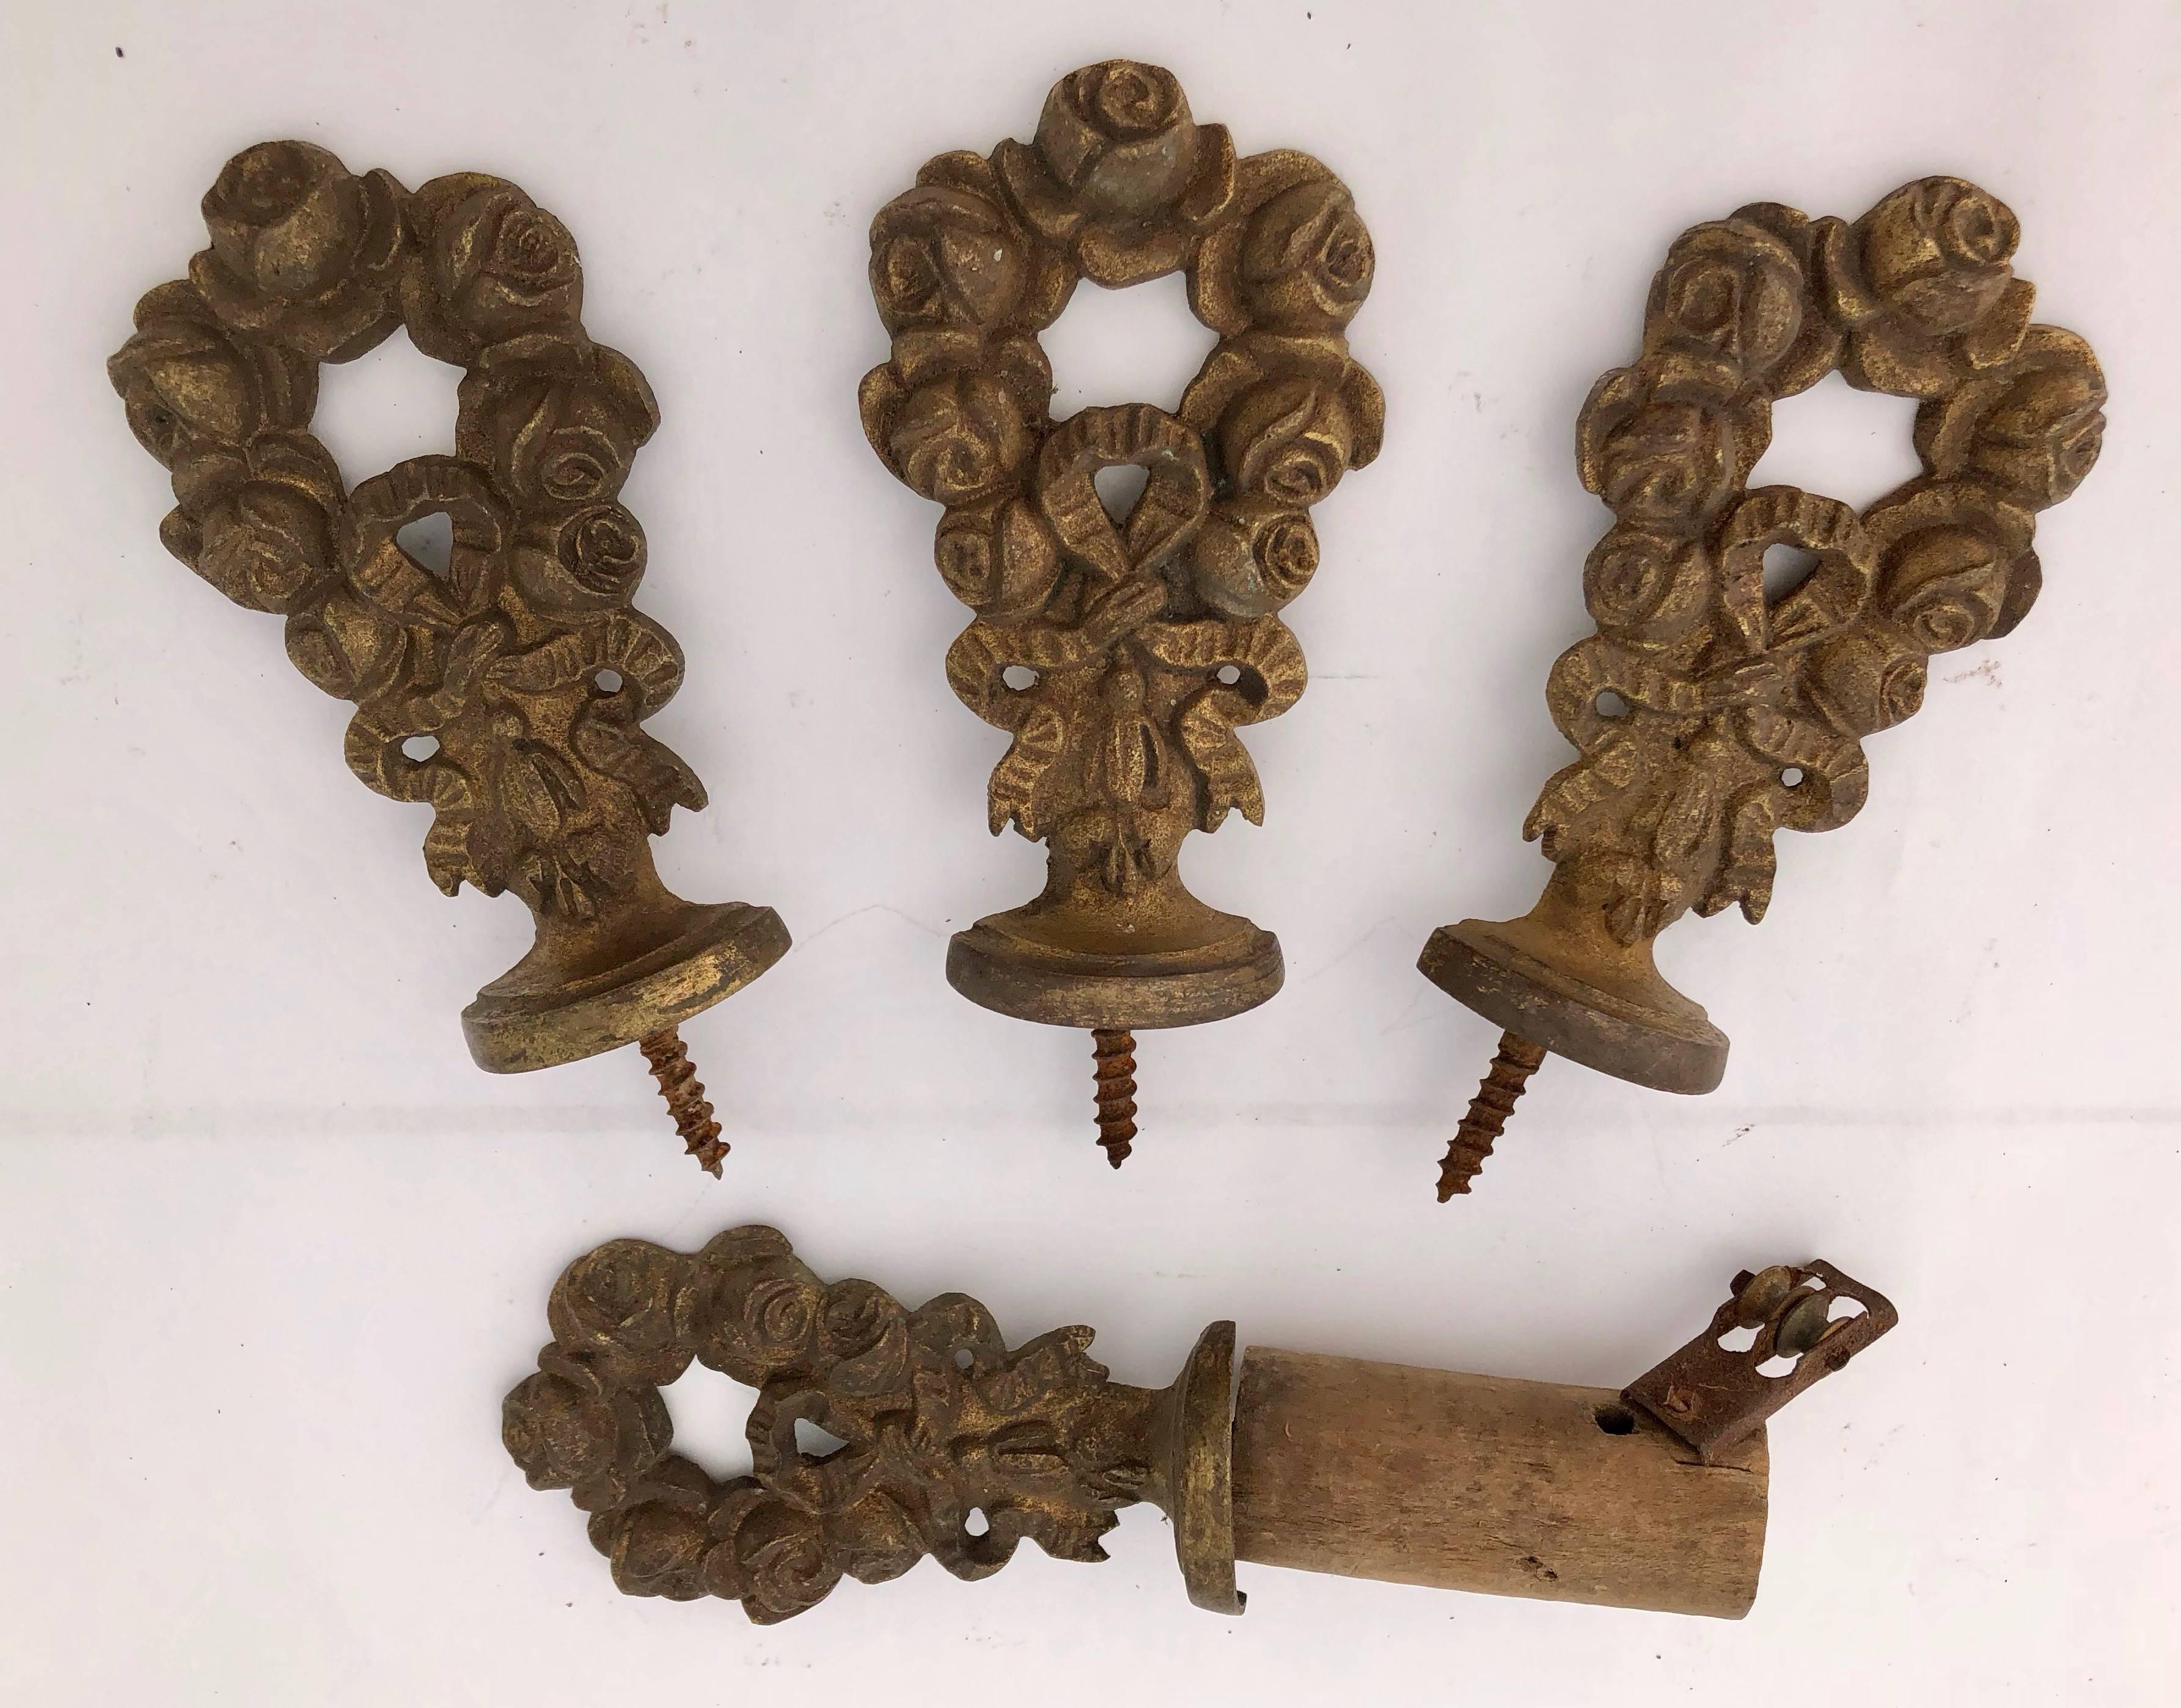 These are gorgeous brass curtain rod ends in a wonderful ose and laces. There are 10 in the set.

Sizes:
4 Rod ends size small W 2.4, D 0.25, H 4.3 inches
2 Rod ends size large W 2.75, D 0.75, H 4.25 inches
2 curtain tie backs W 2.3, D 4, H